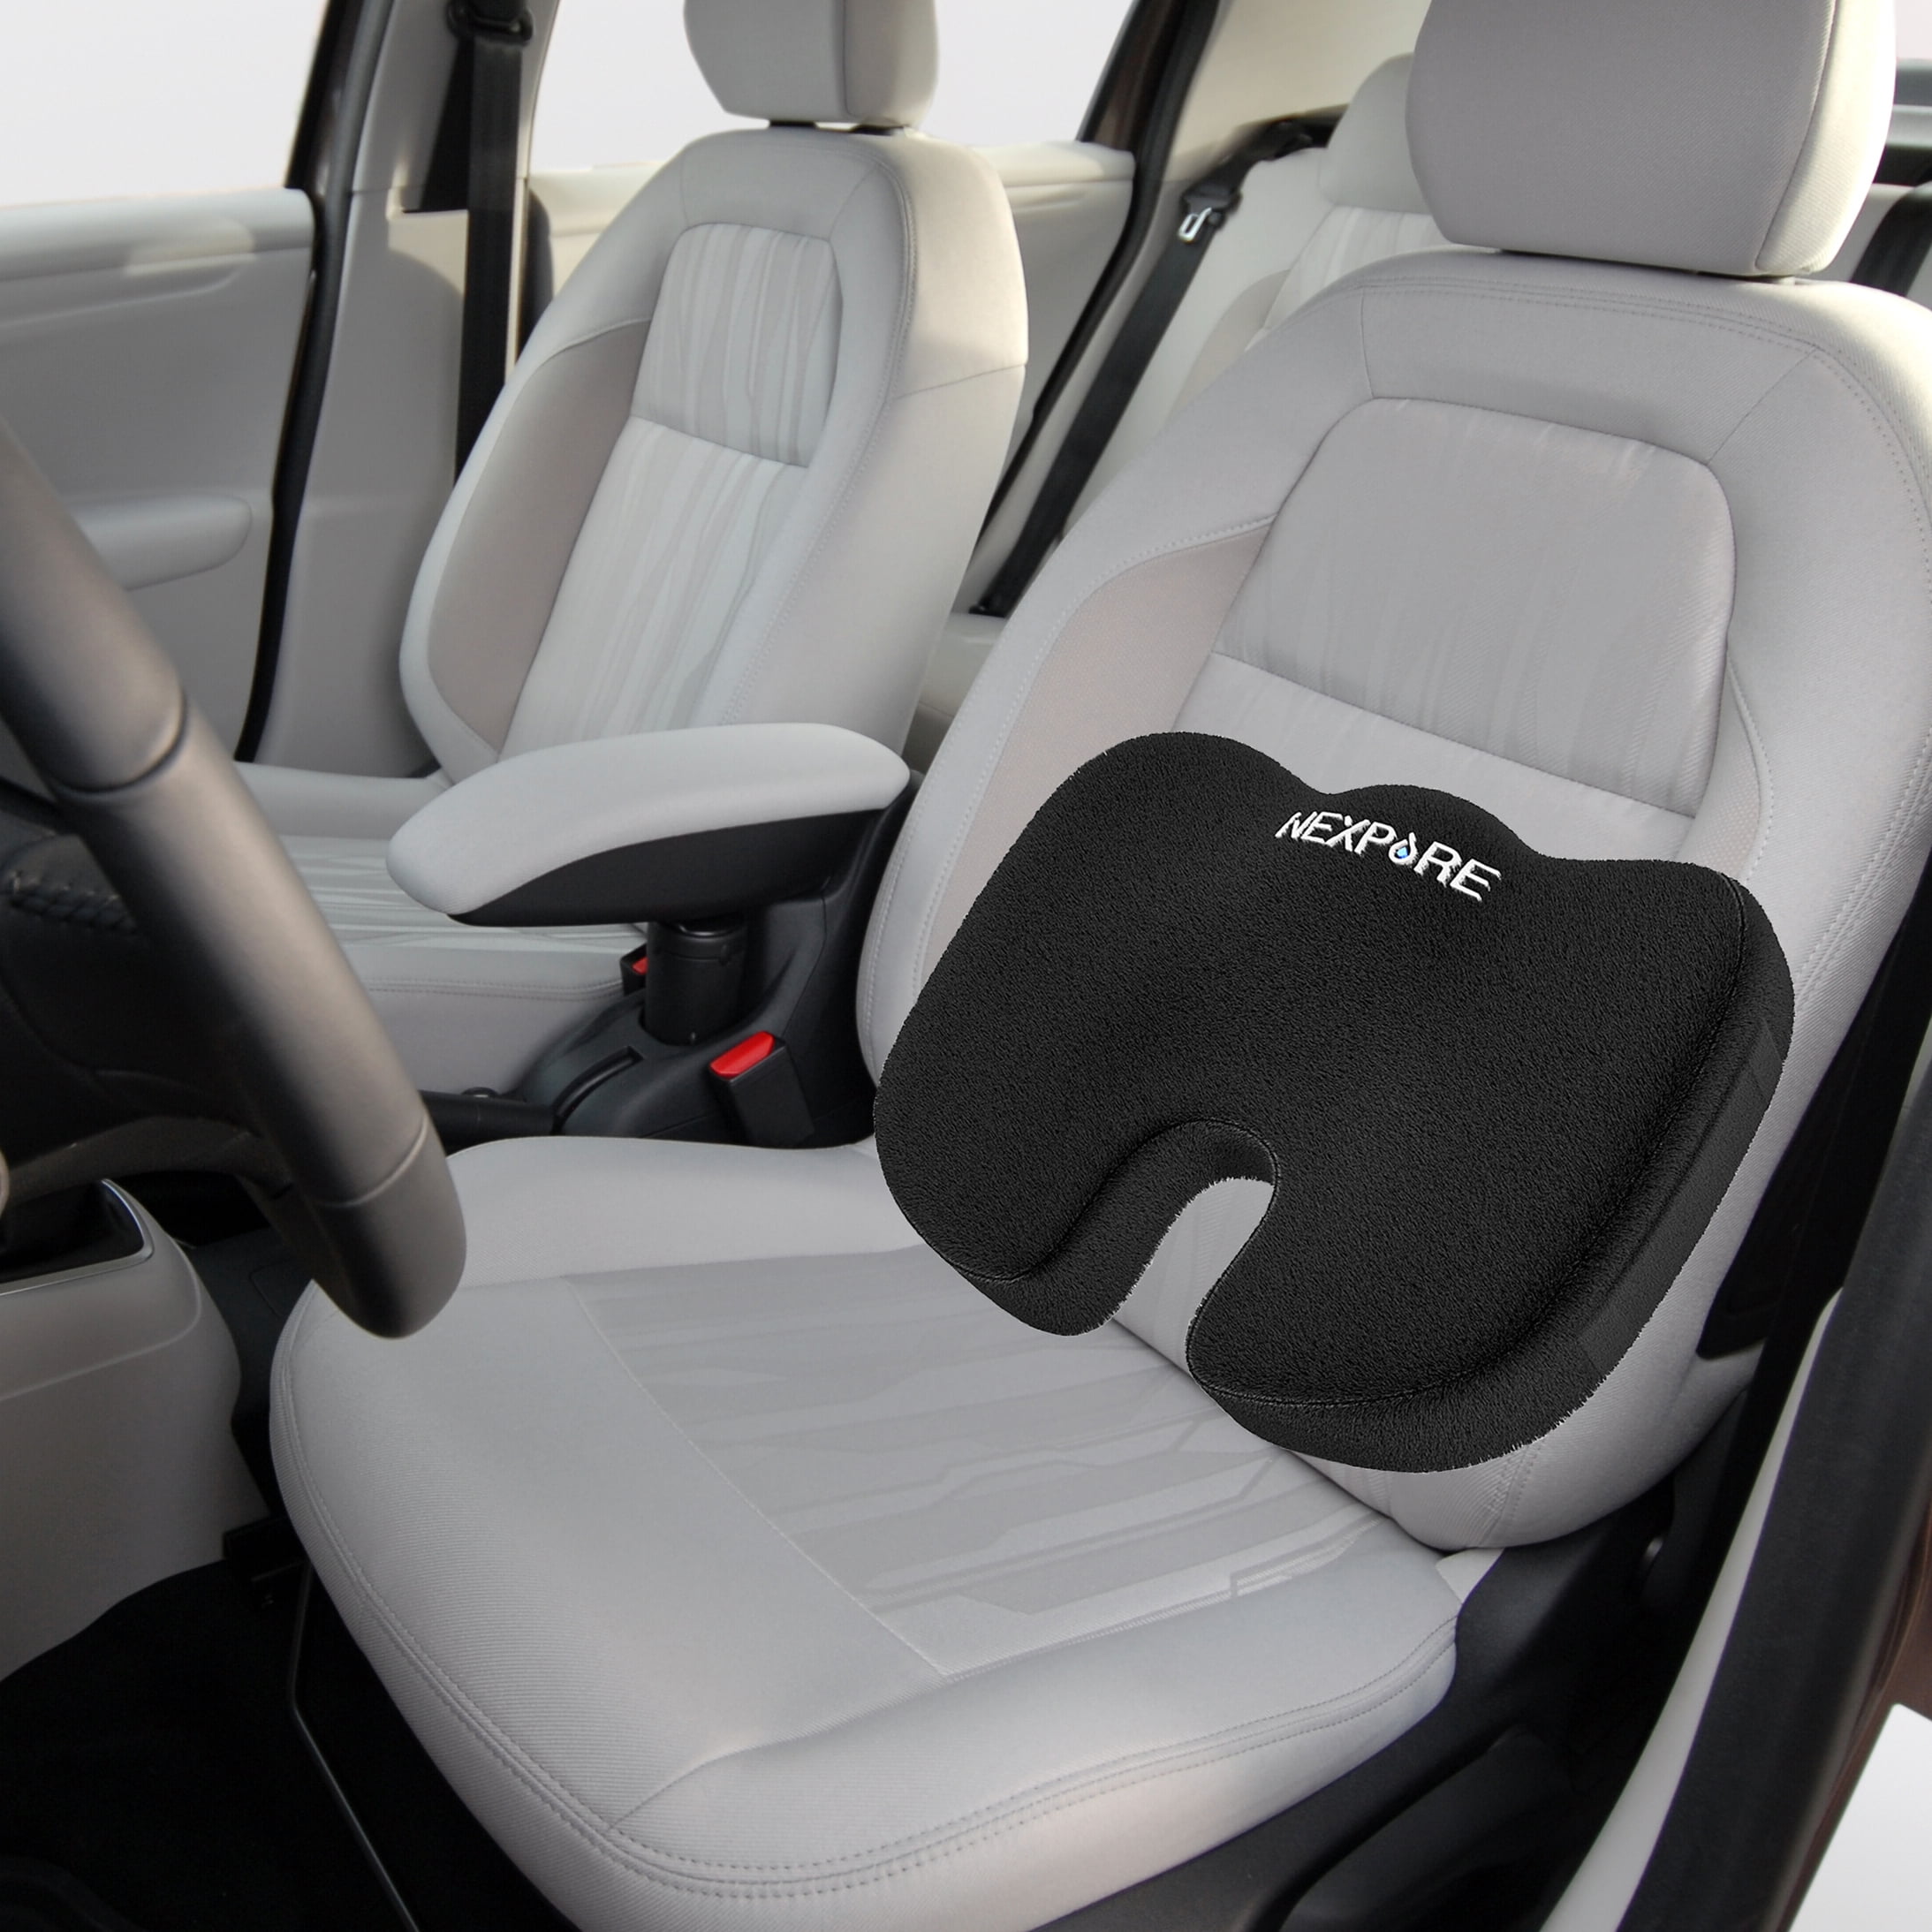 HealthMate Black Polyester Seat Cushion for Car - Provides Coccyx